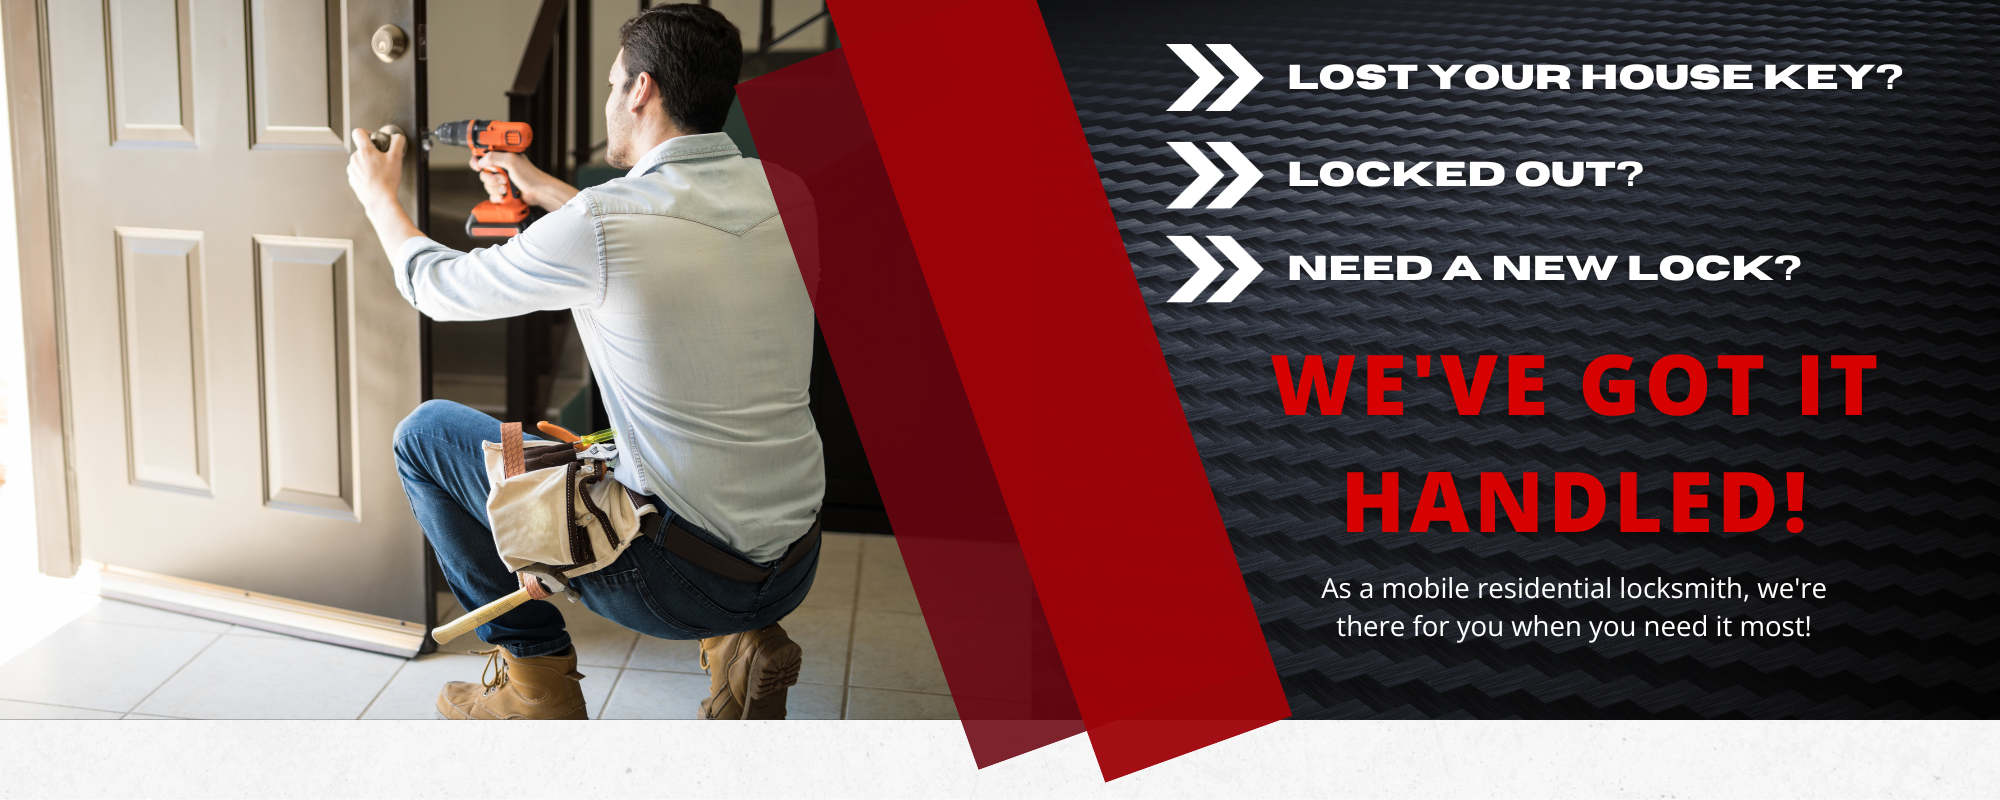 residential locksmith services graphic